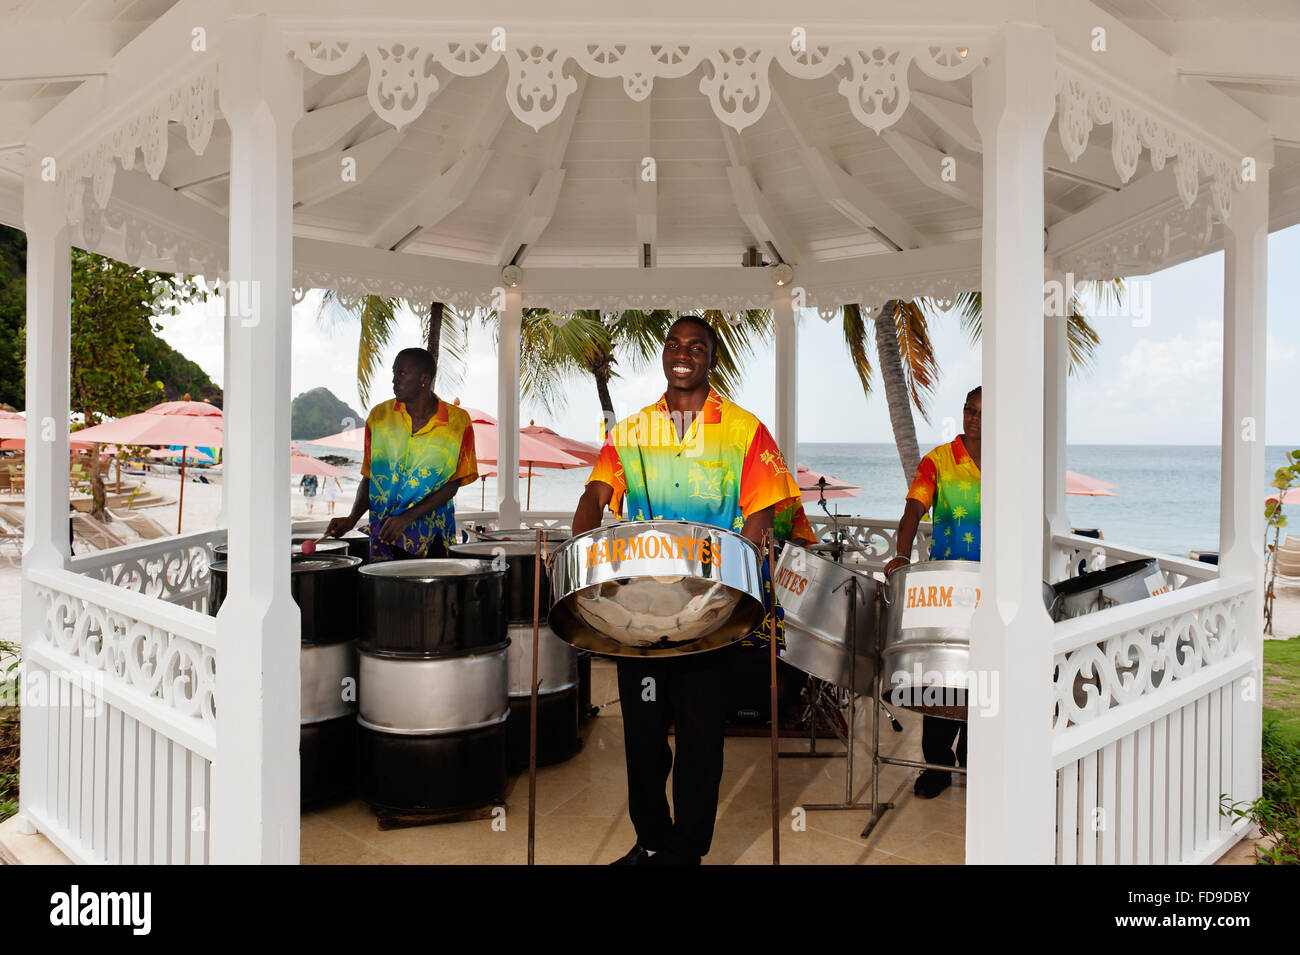 Steel drummers play in pagoda on beach, St Lucia,  Lesser Antilles, Caribbean Stock Photo